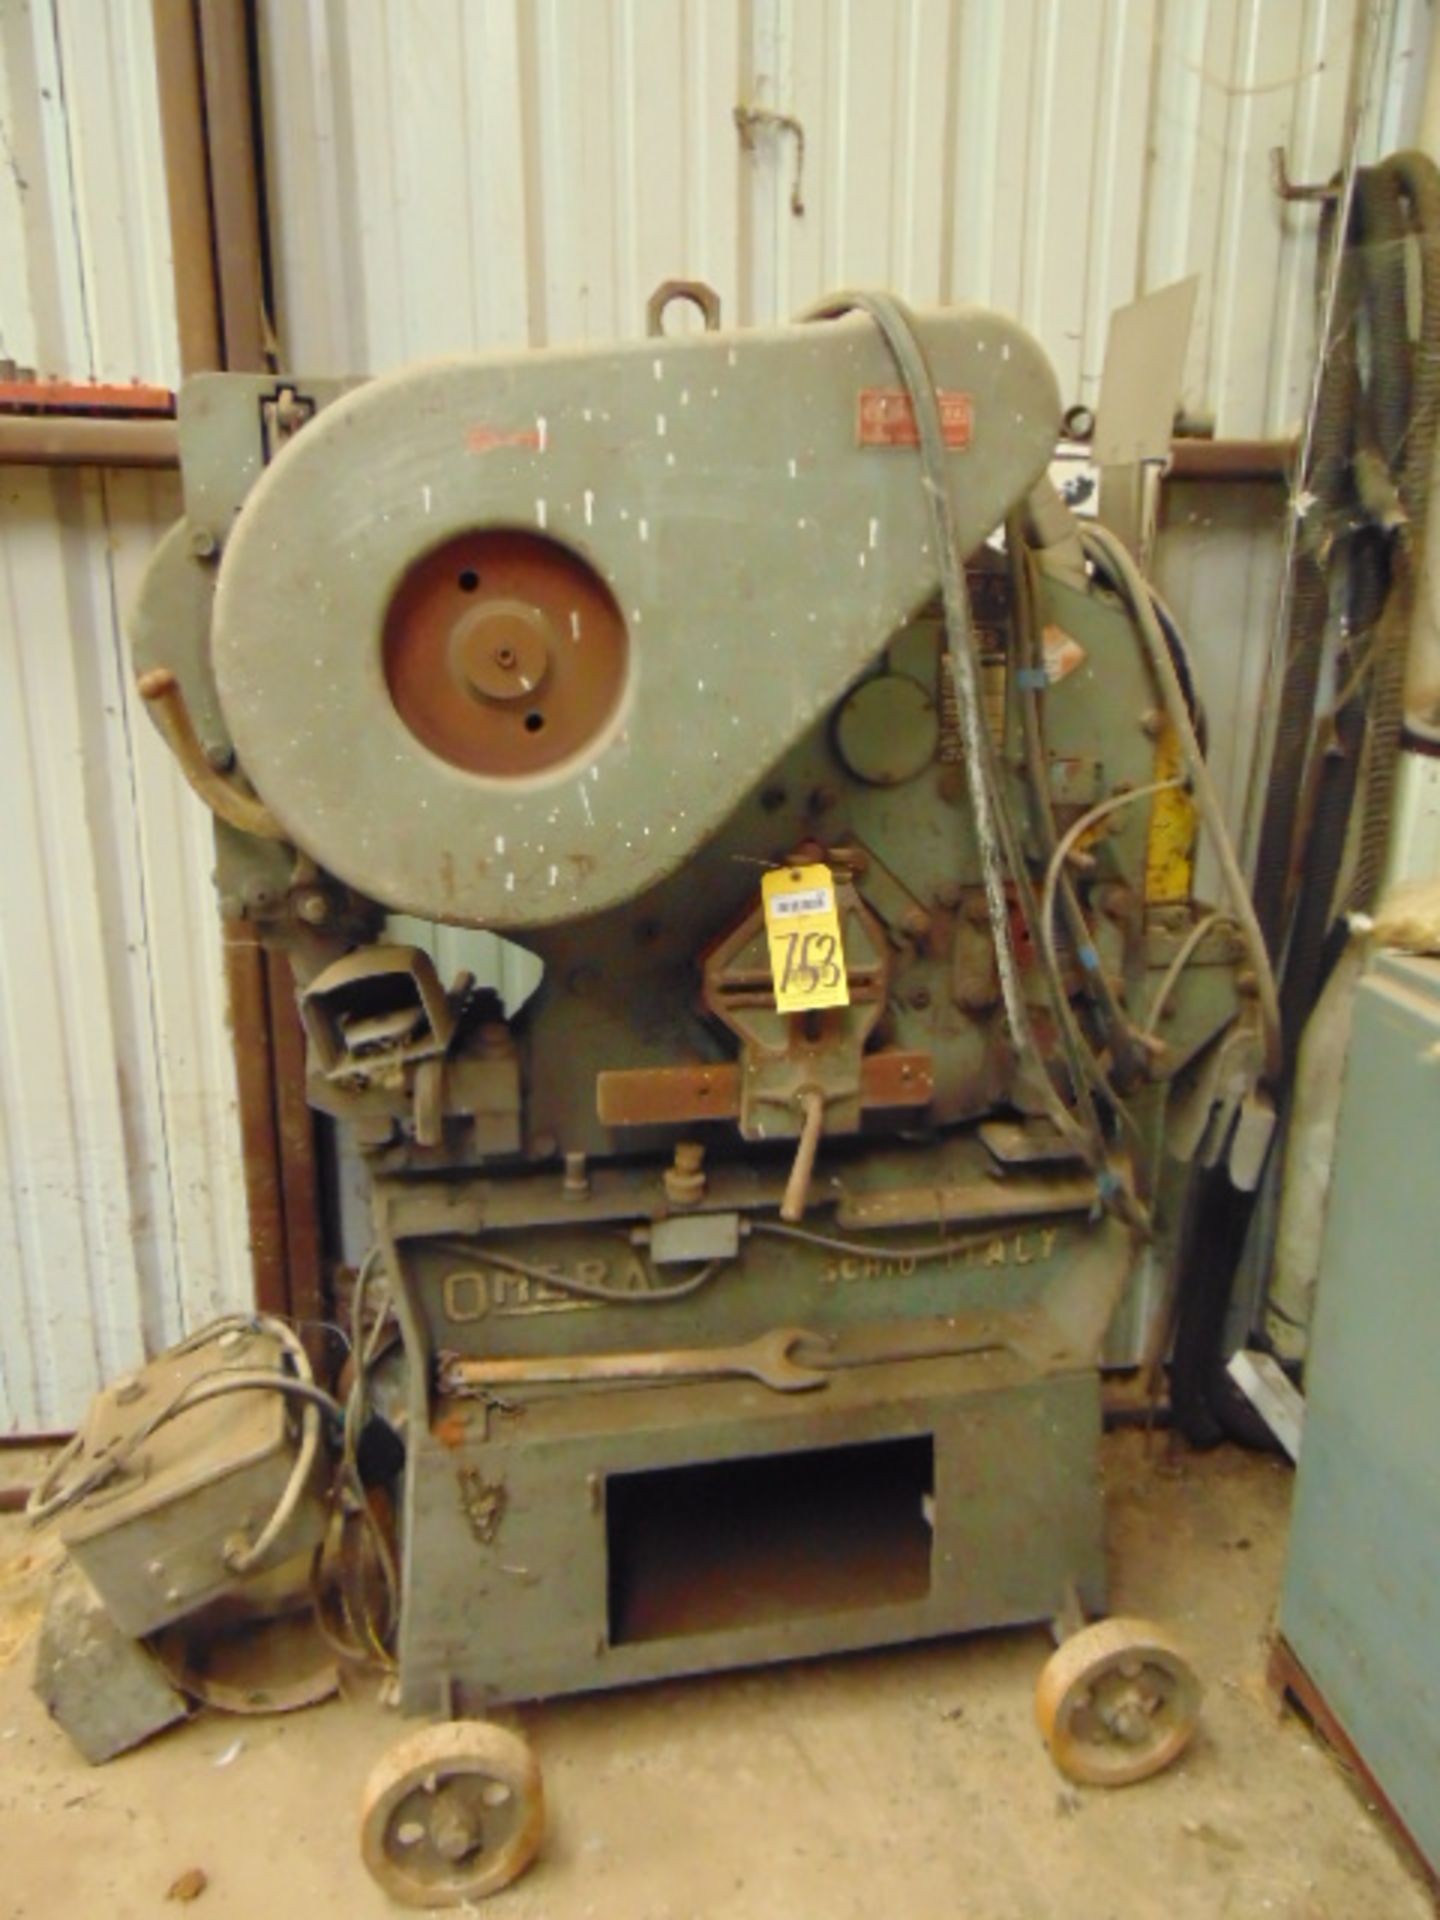 IRONWORKER, OMERA MULTIMATIC 13, S/N 665553 (Located at: Gearn, 3375 US-60, Hereford, TX 79045)